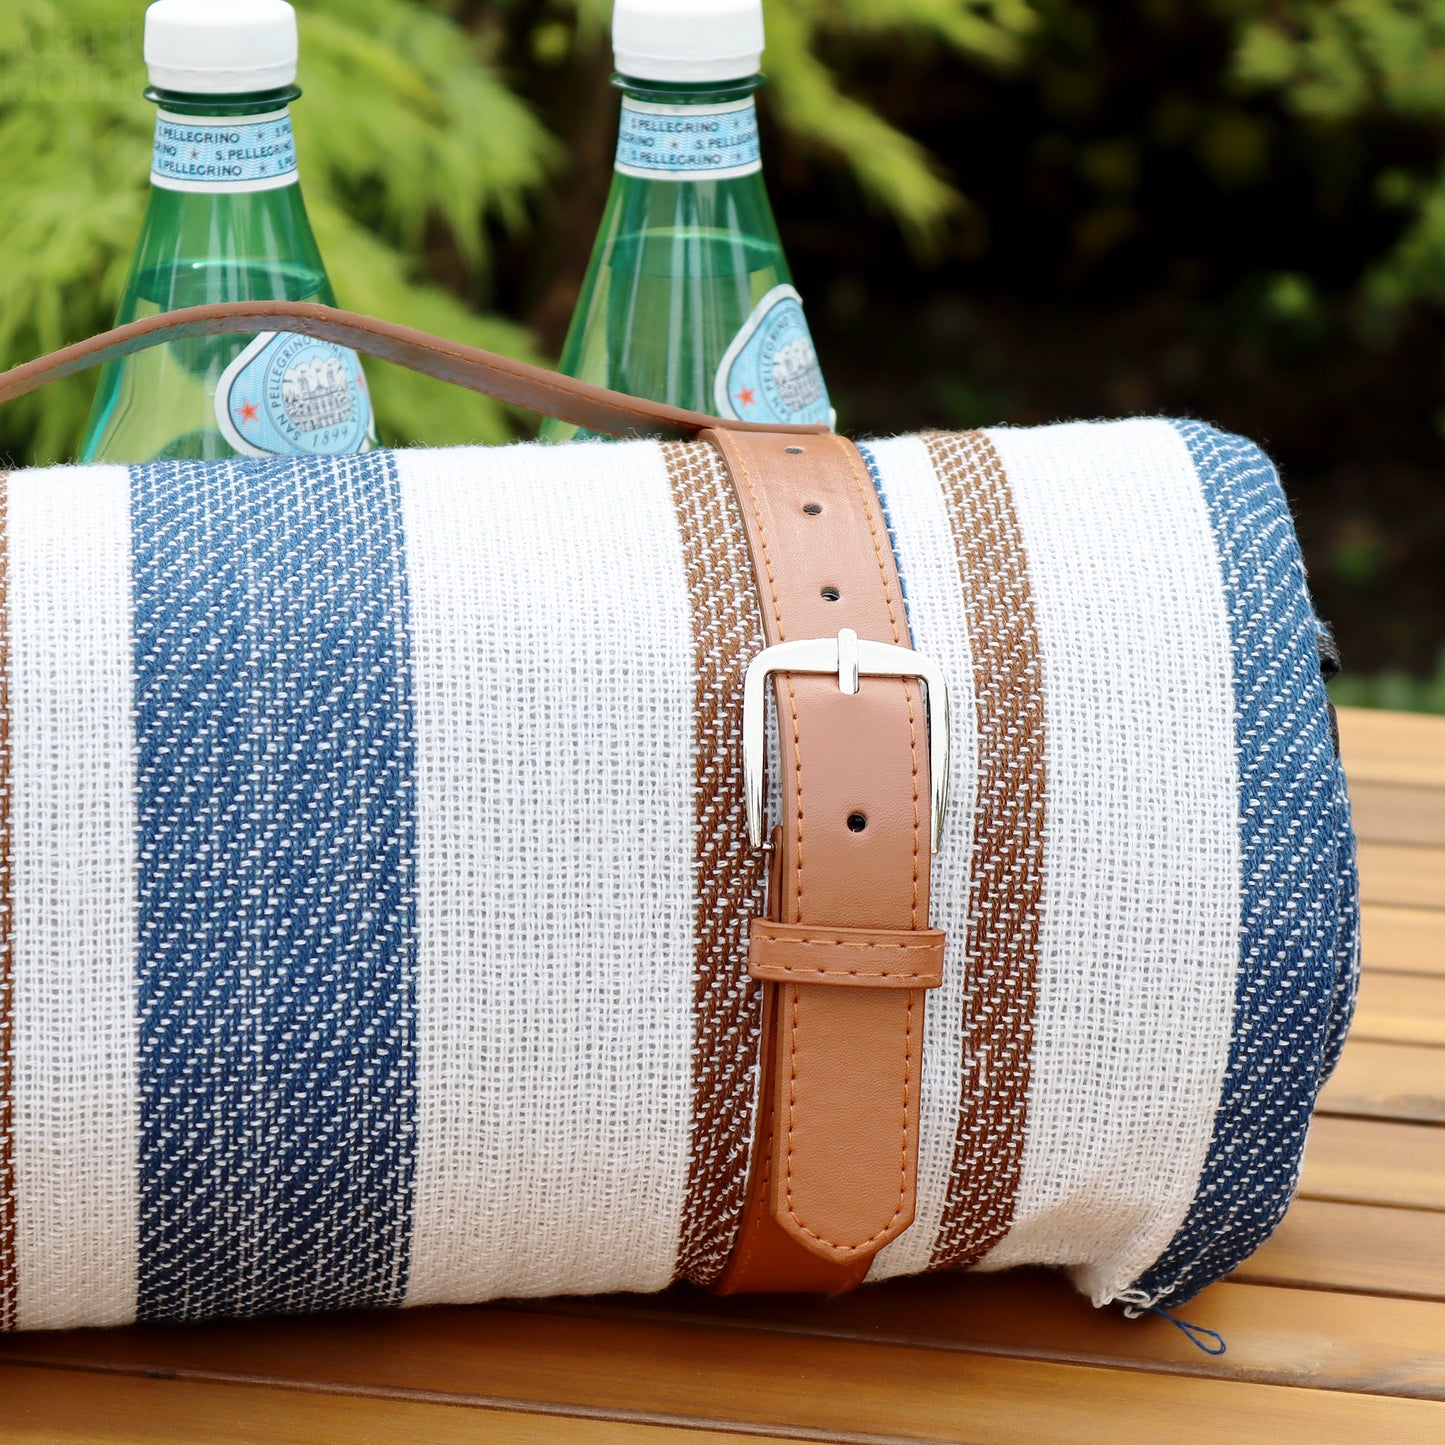 Blue And Brown Striped Picnic Blanket